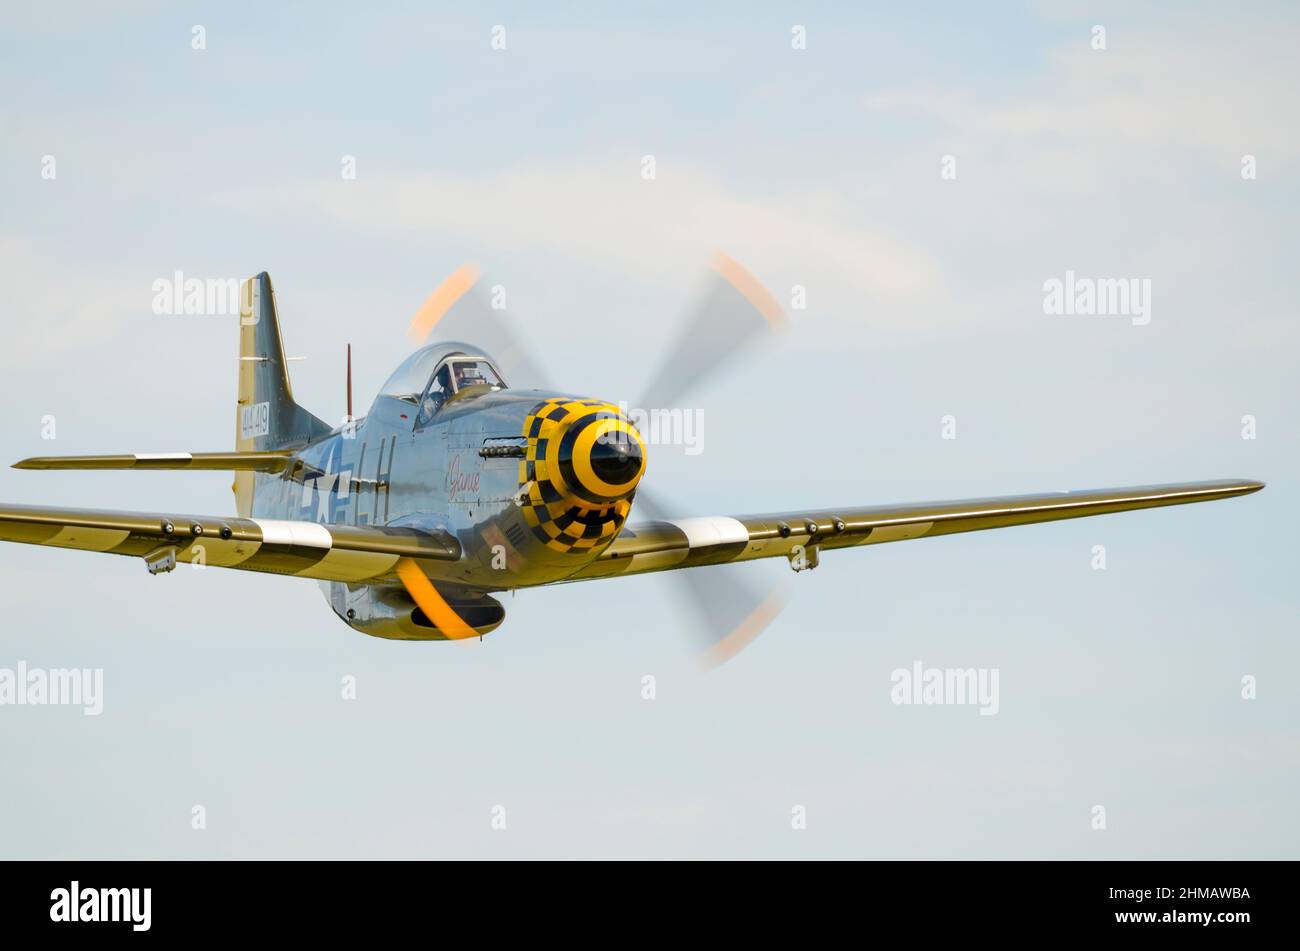 North American P-51 Mustang fighter plane called Janie, flying fast and low. Owned by Maurice Hammond and flown by Dave Evans. Stock Photo